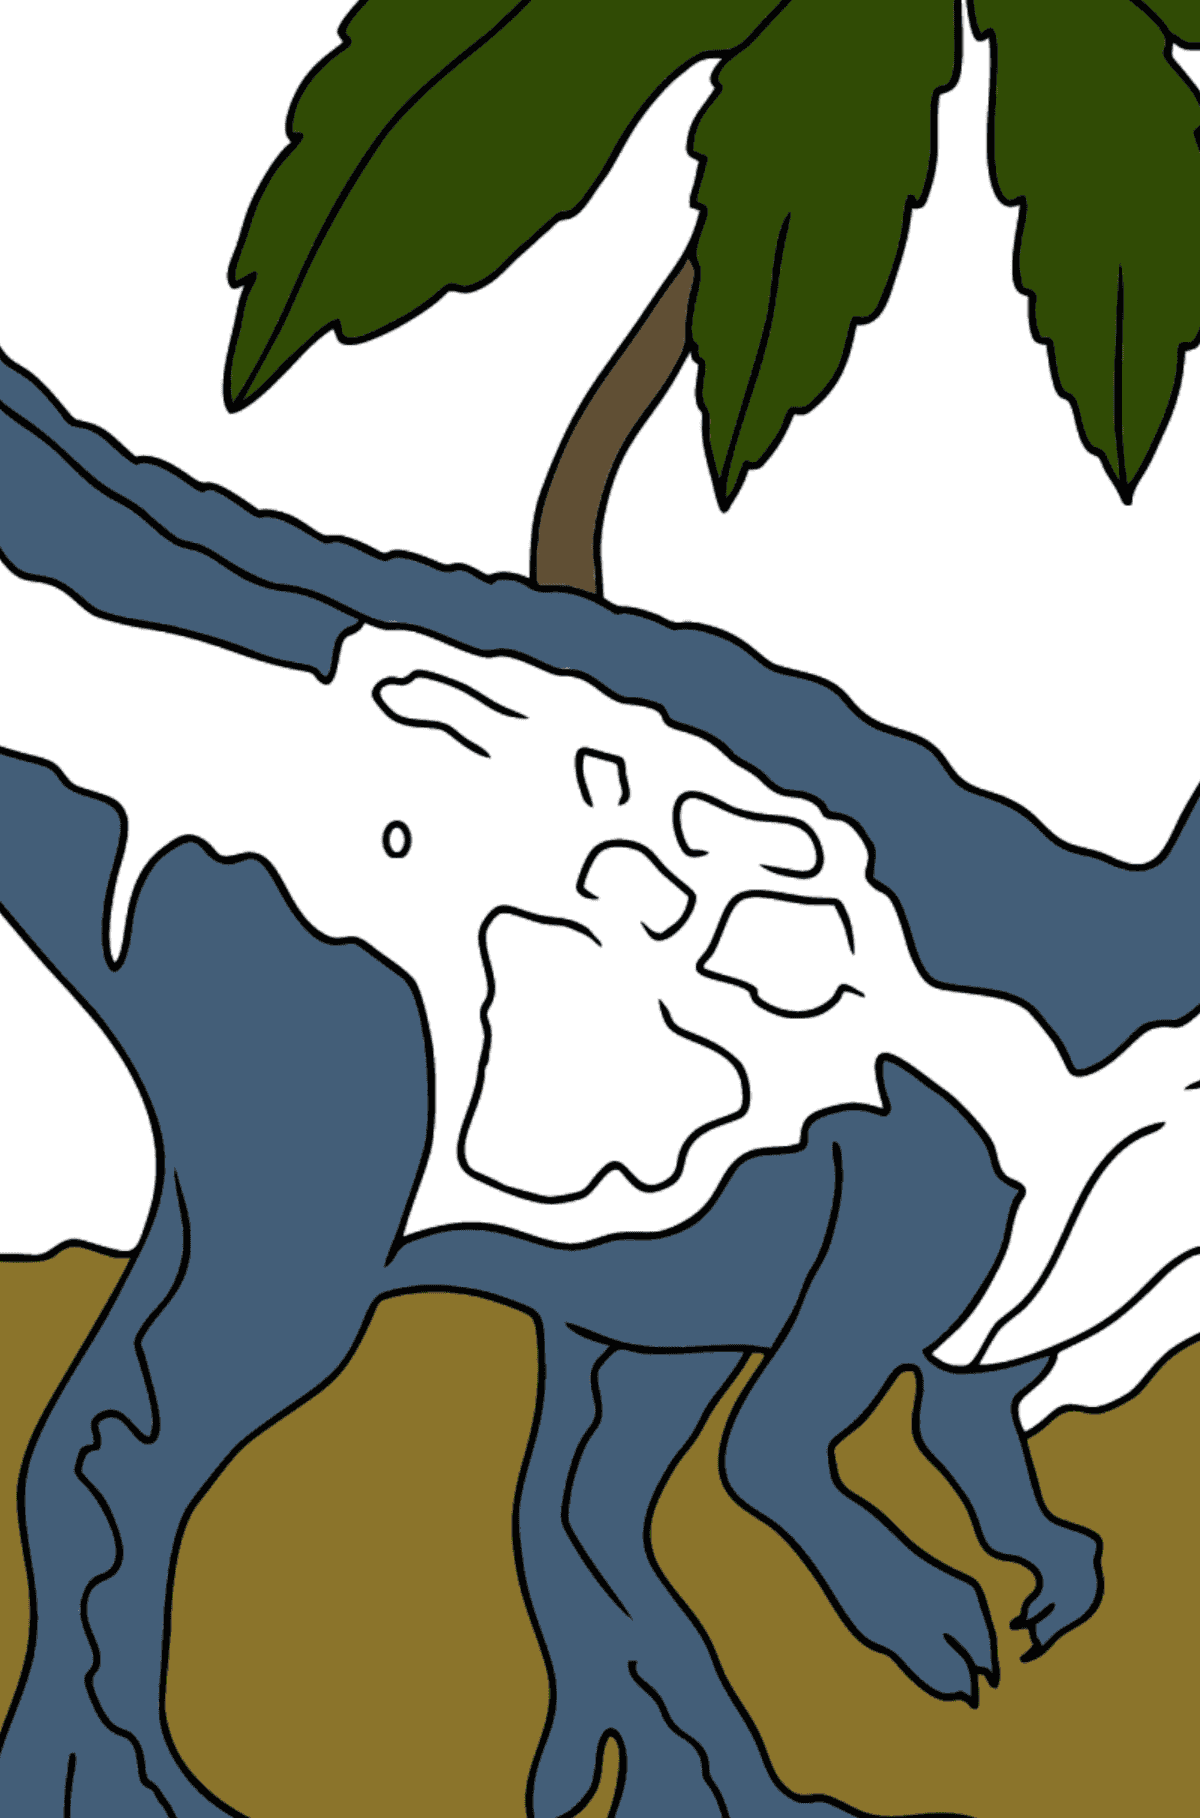 Coloring Page - Tyrannosaurus - The Best Hunter Among Dinosaurs - Coloring by Geometric Shapes for Kids